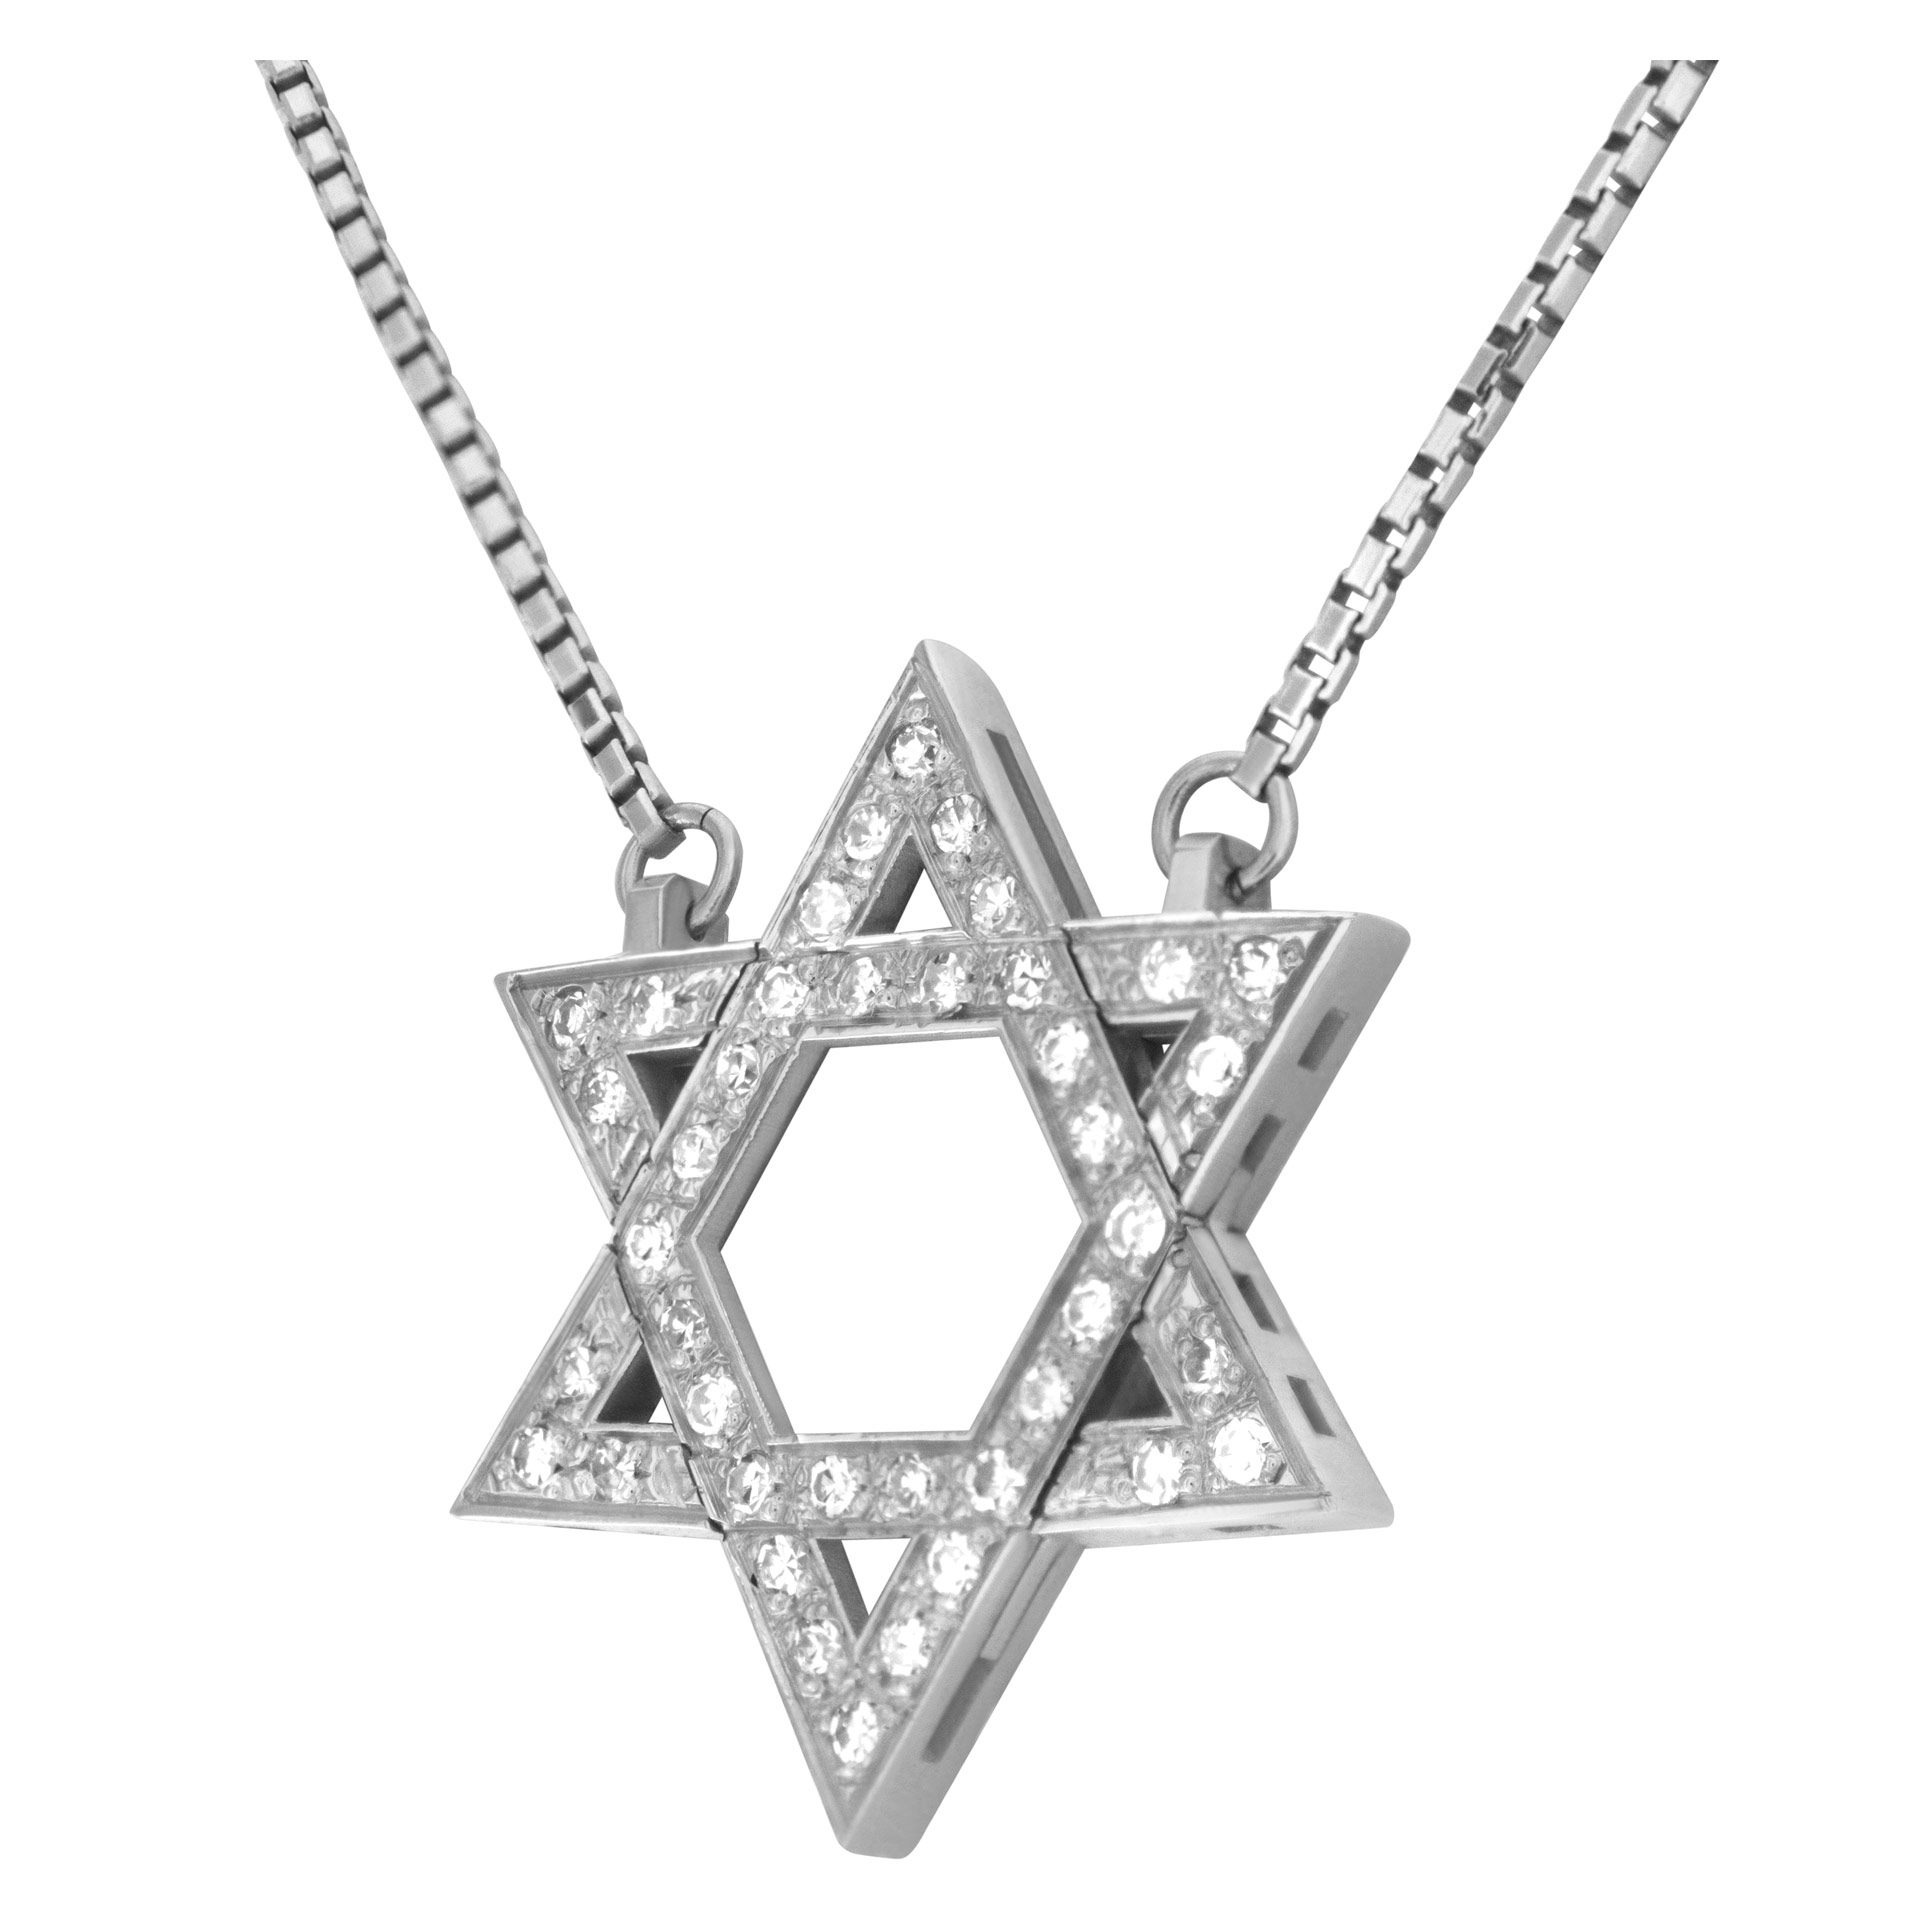 "Star of David" pendant with approximately 0.75 carat pave diamonds set in 18k white gold image 3